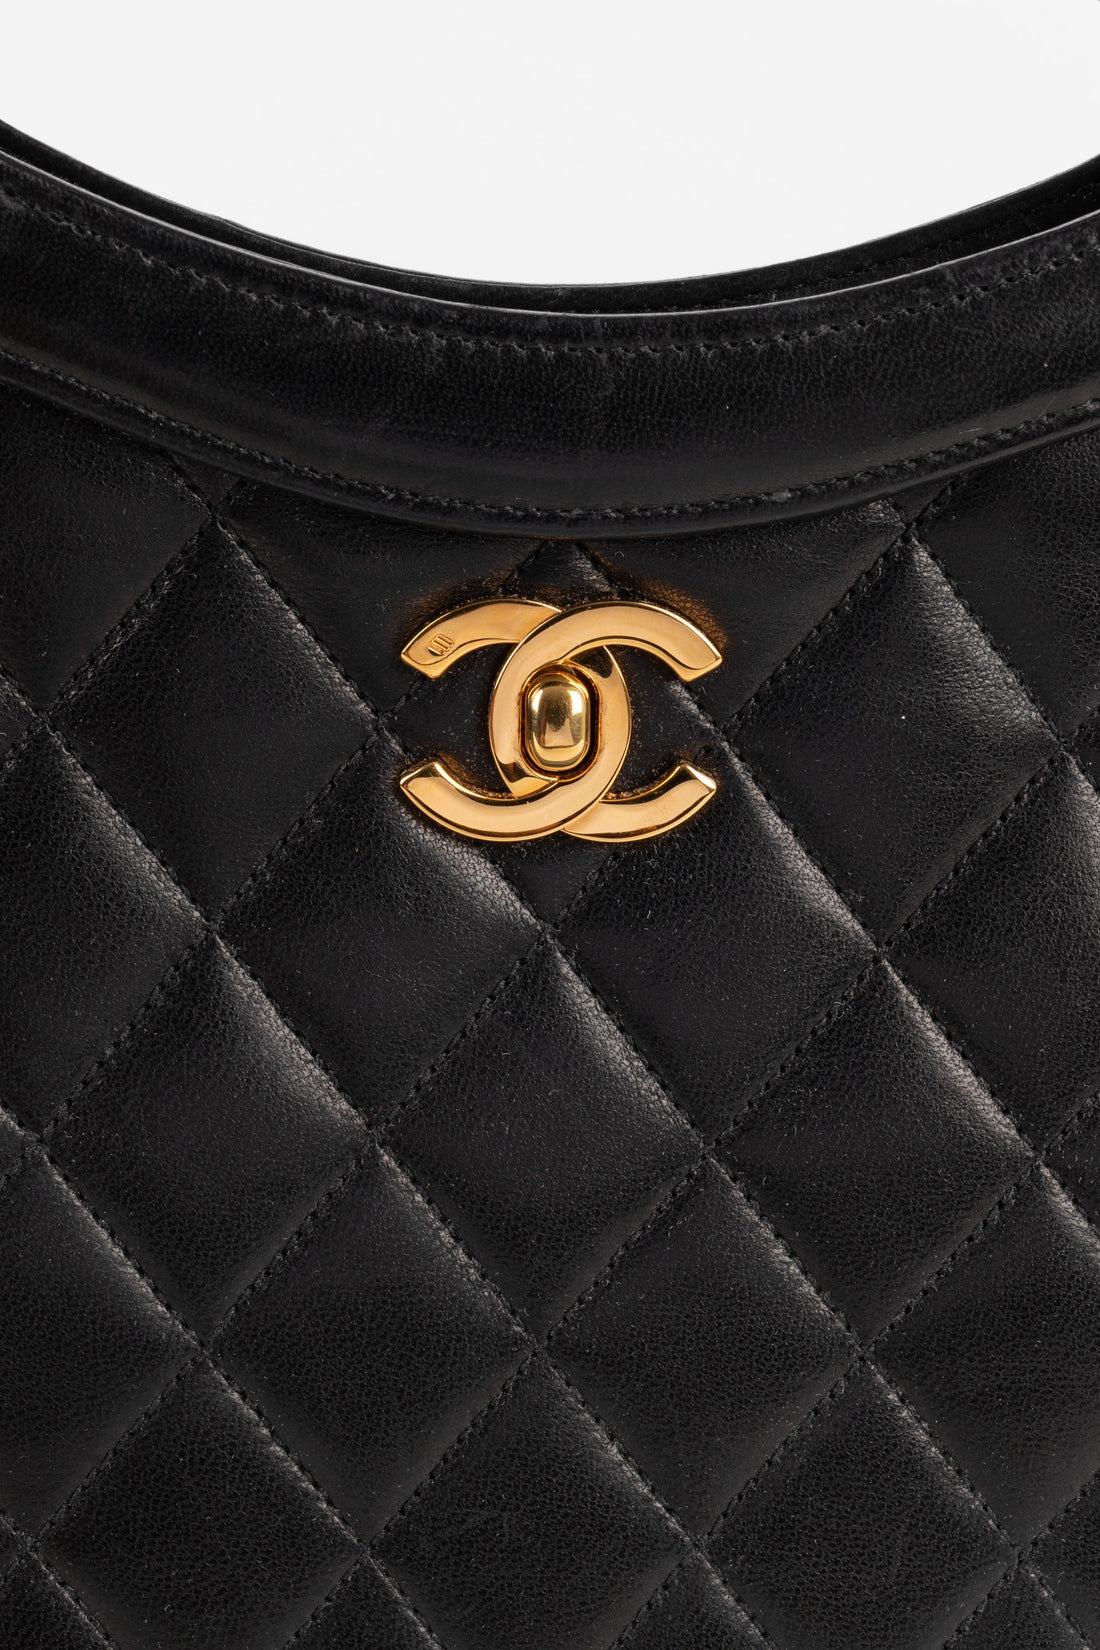 Chanel Quilted Black Leather Bag with Red Leather Inside, 1989/1991 3